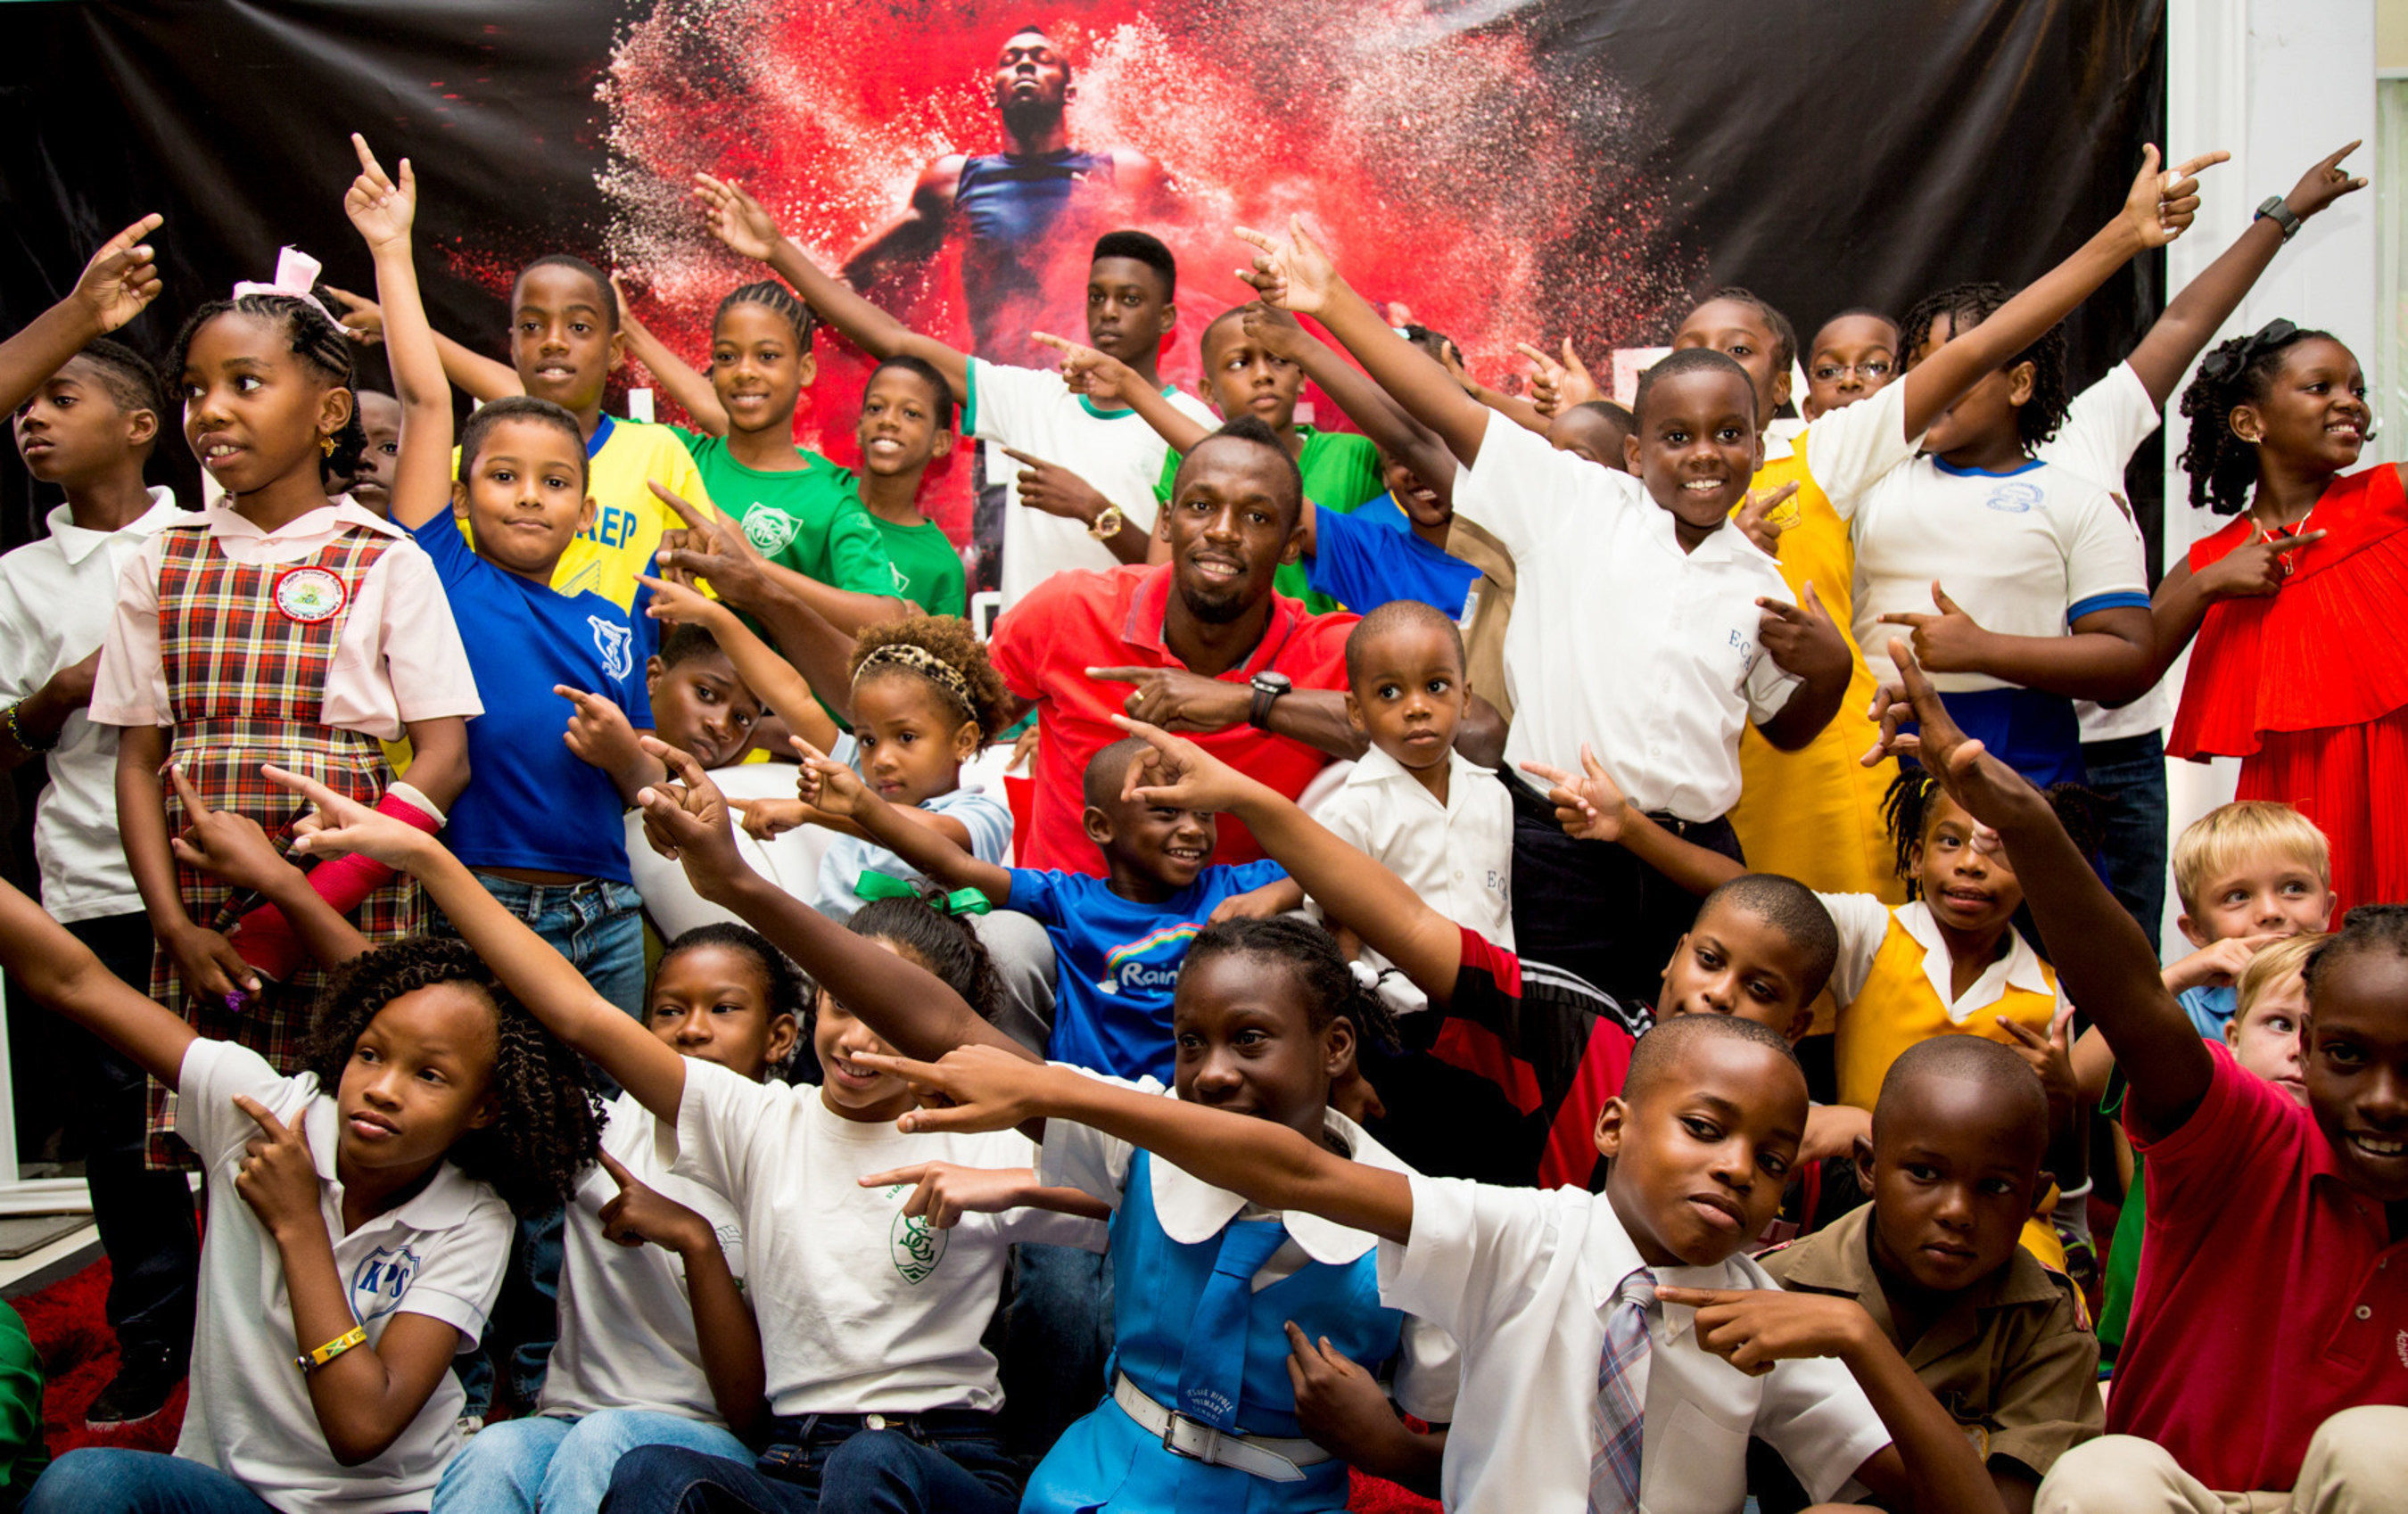 Digicel invited aspiring little newshounds from across the Caribbean to a kiddie press conference with Usain Bolt, the world's fastest man in the hot seat. The kiddie press pack surrounds Usain for an impromptu lightning bolt having peppered him with probing questions like "How many girlfriends do you have?" and "What do you think of vegetables?" in Kingston, Jamaica on Tuesday.